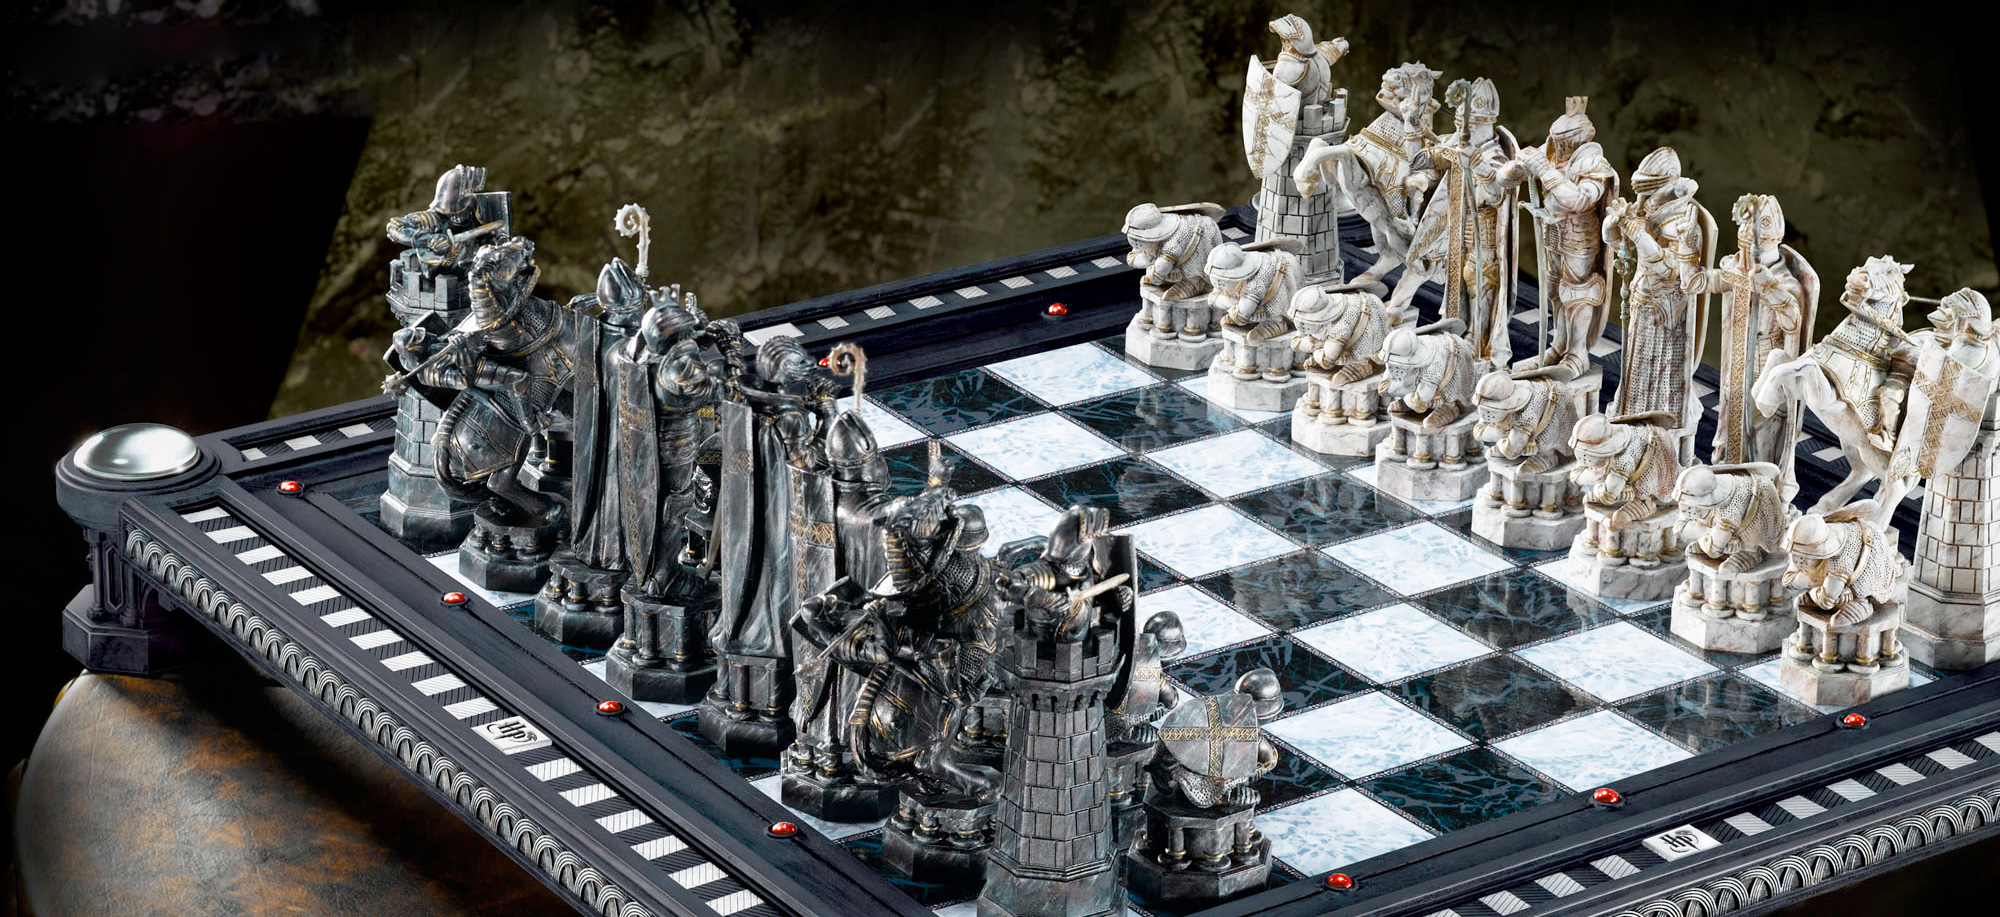 Harry Potter Wizard/'s Chess Set Pieces.